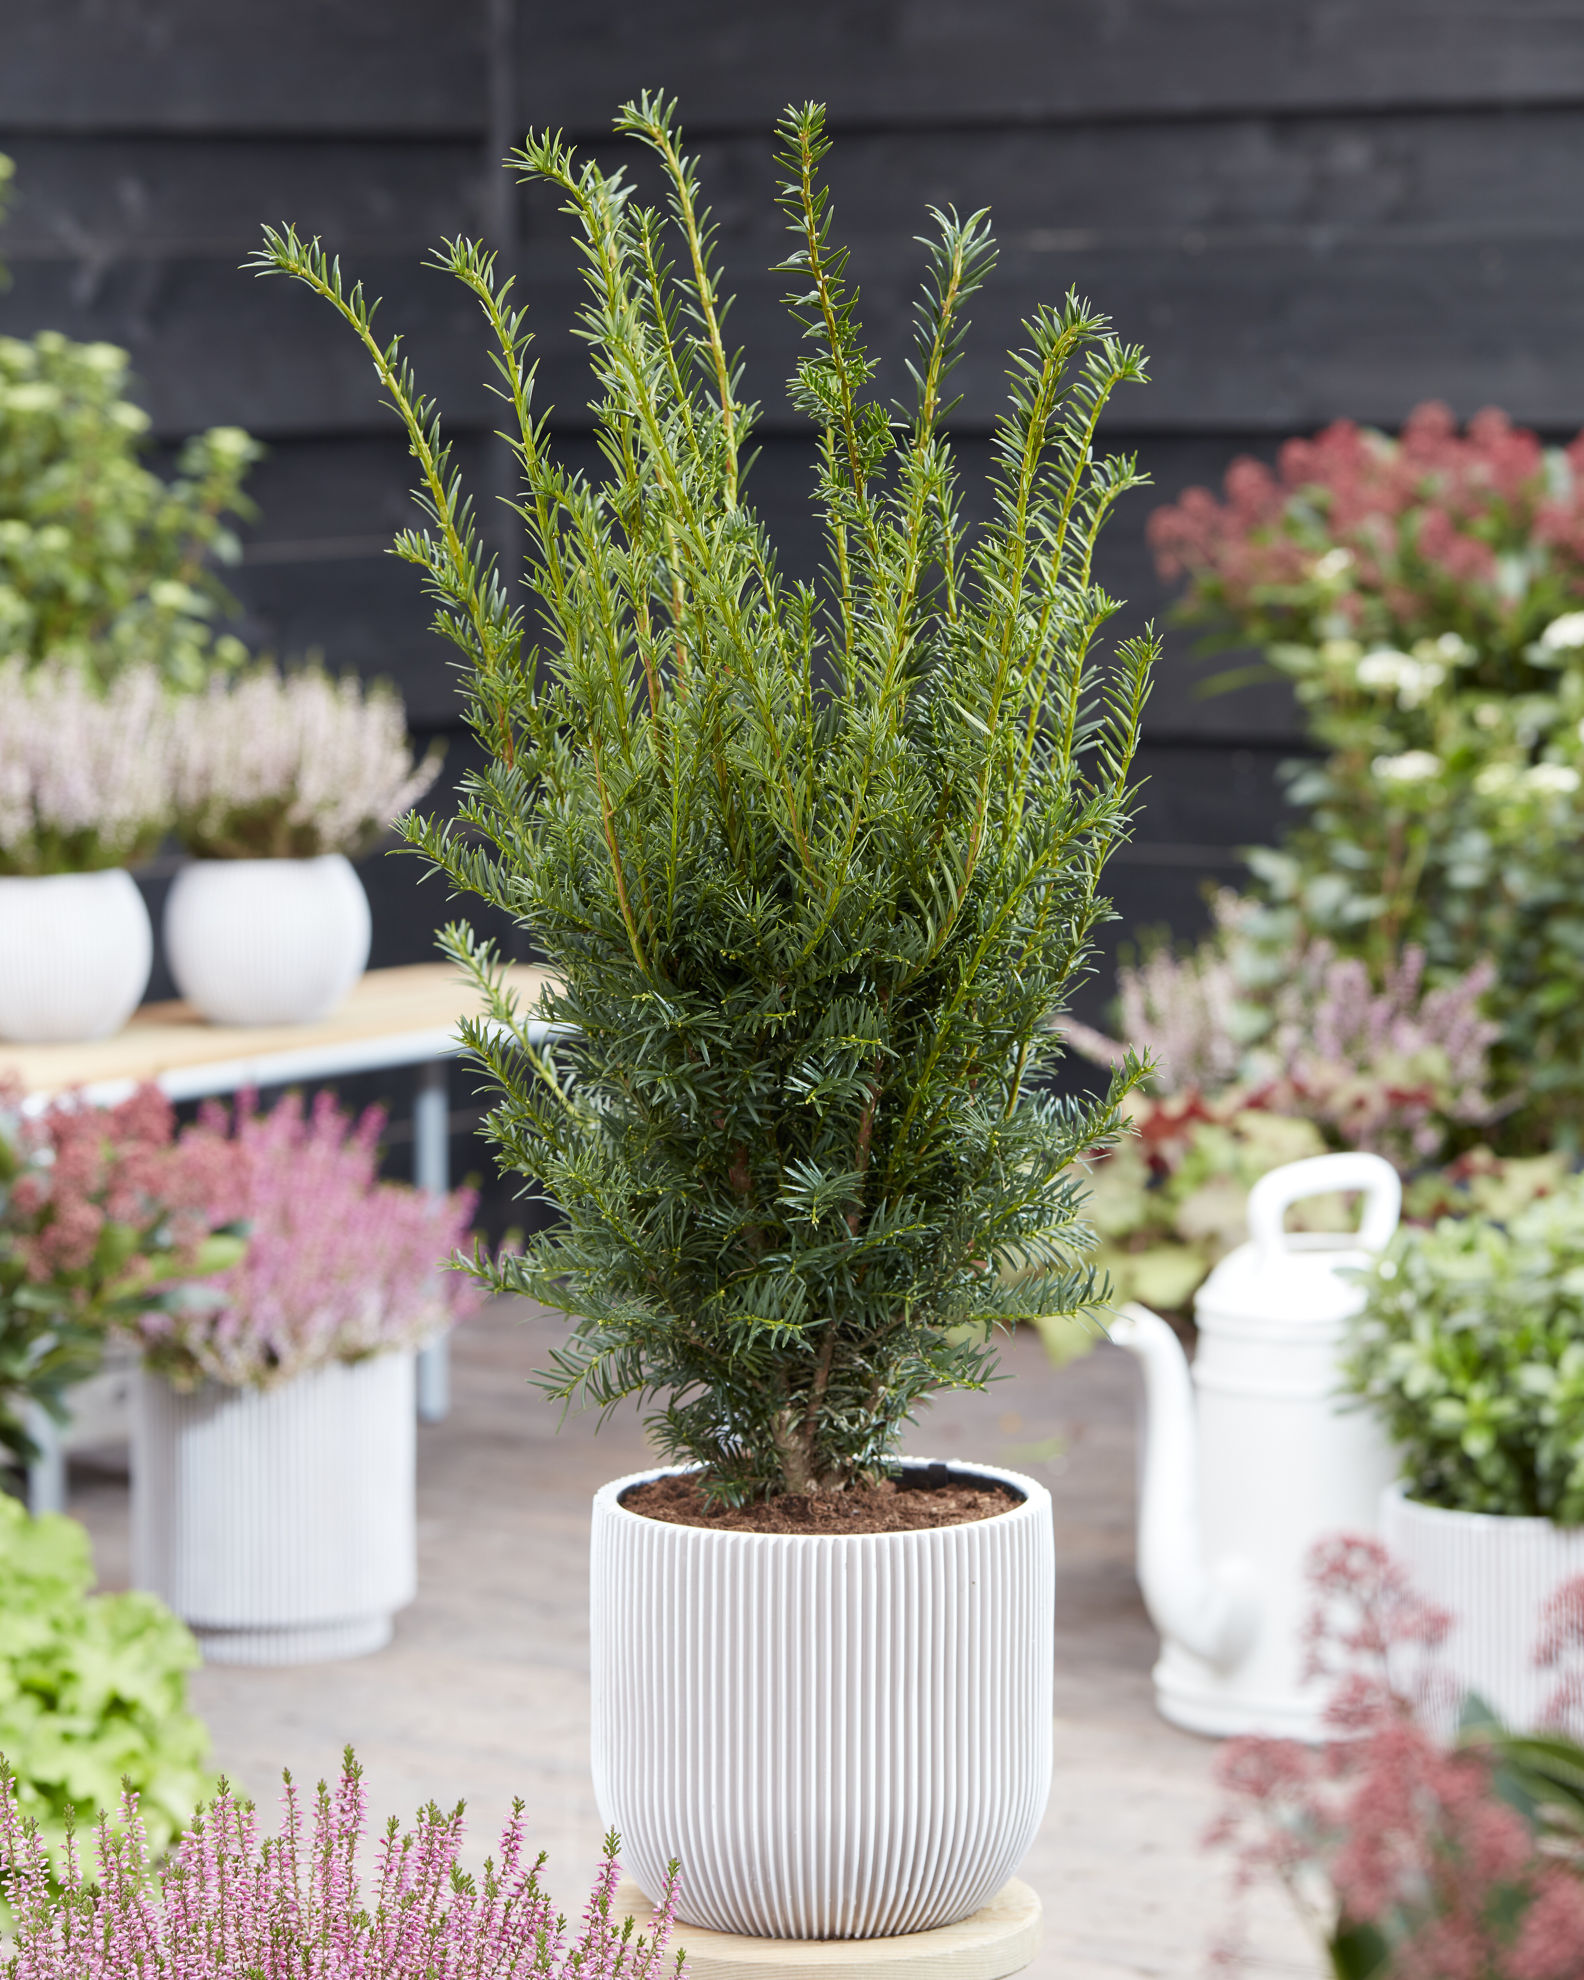 http://www.breederplants.nl/images/thumbs/0002123_taxus.jpeg